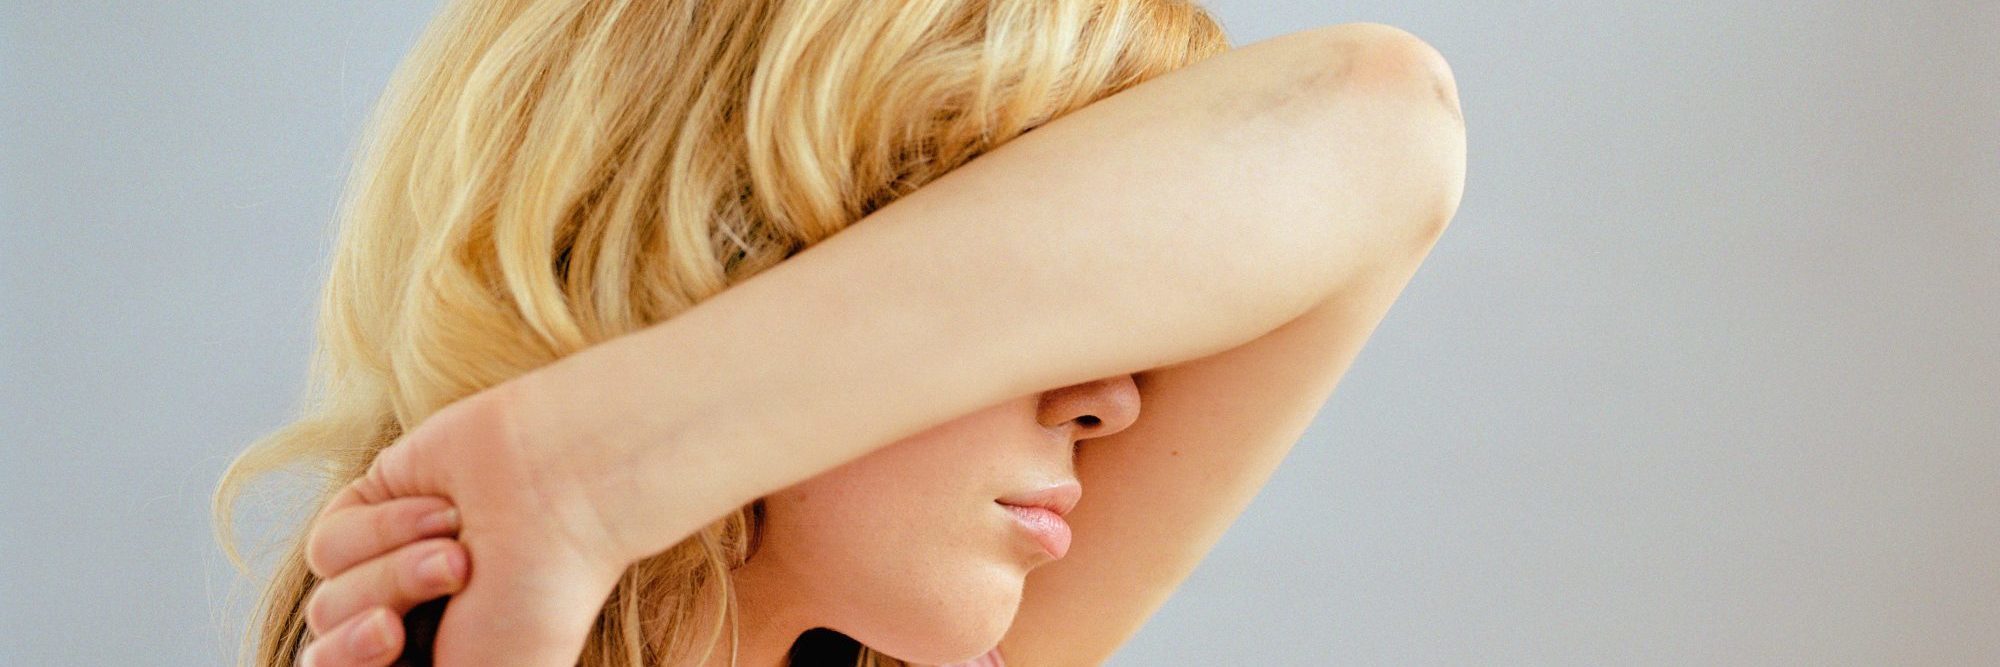 blonde woman covering face with arm